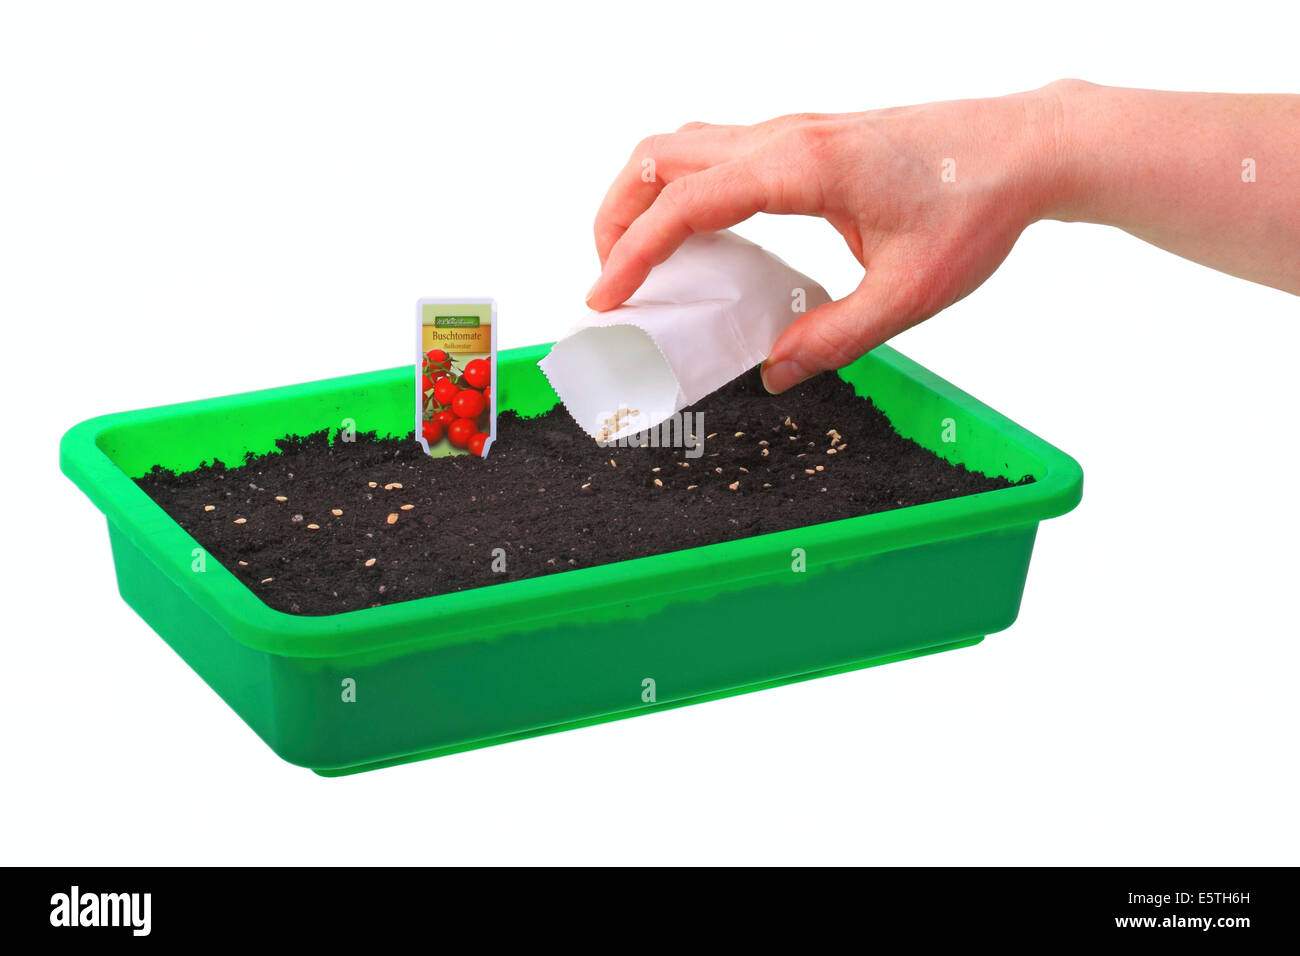 Sowing of tomato seeds (Solanum lycopersicum) in a seed tray Stock Photo